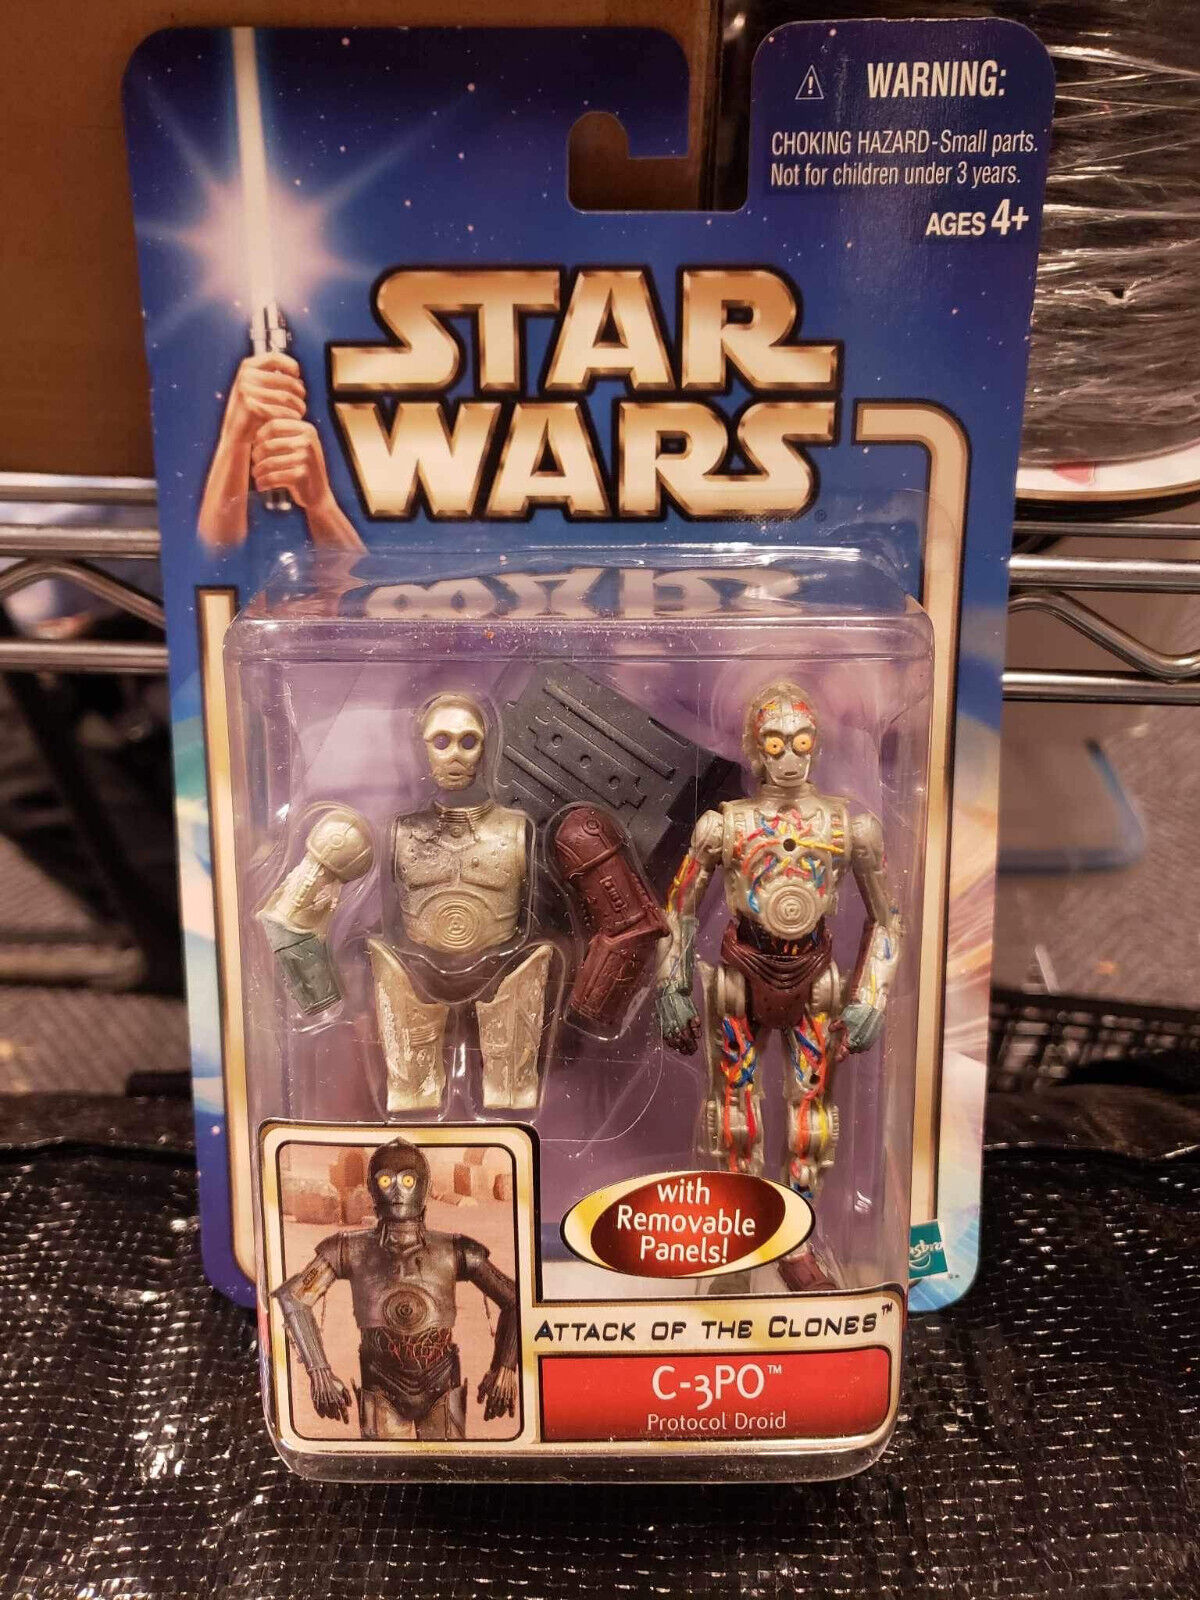 Star Wars Attack Of The Clones - C-3PO - Hasbro 2002 Sealed Action Figure